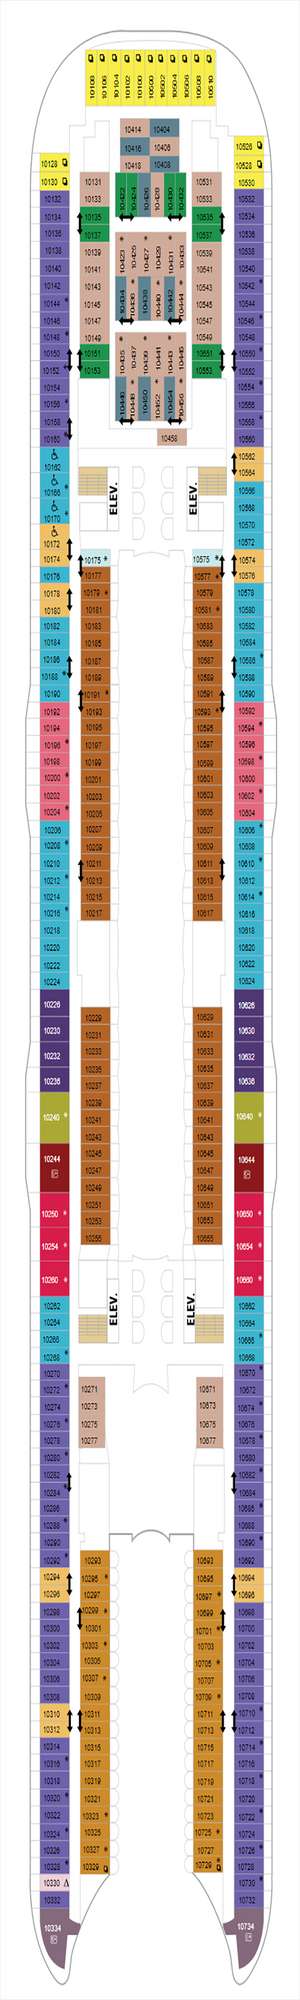 Deck plan for Symphony of the Seas